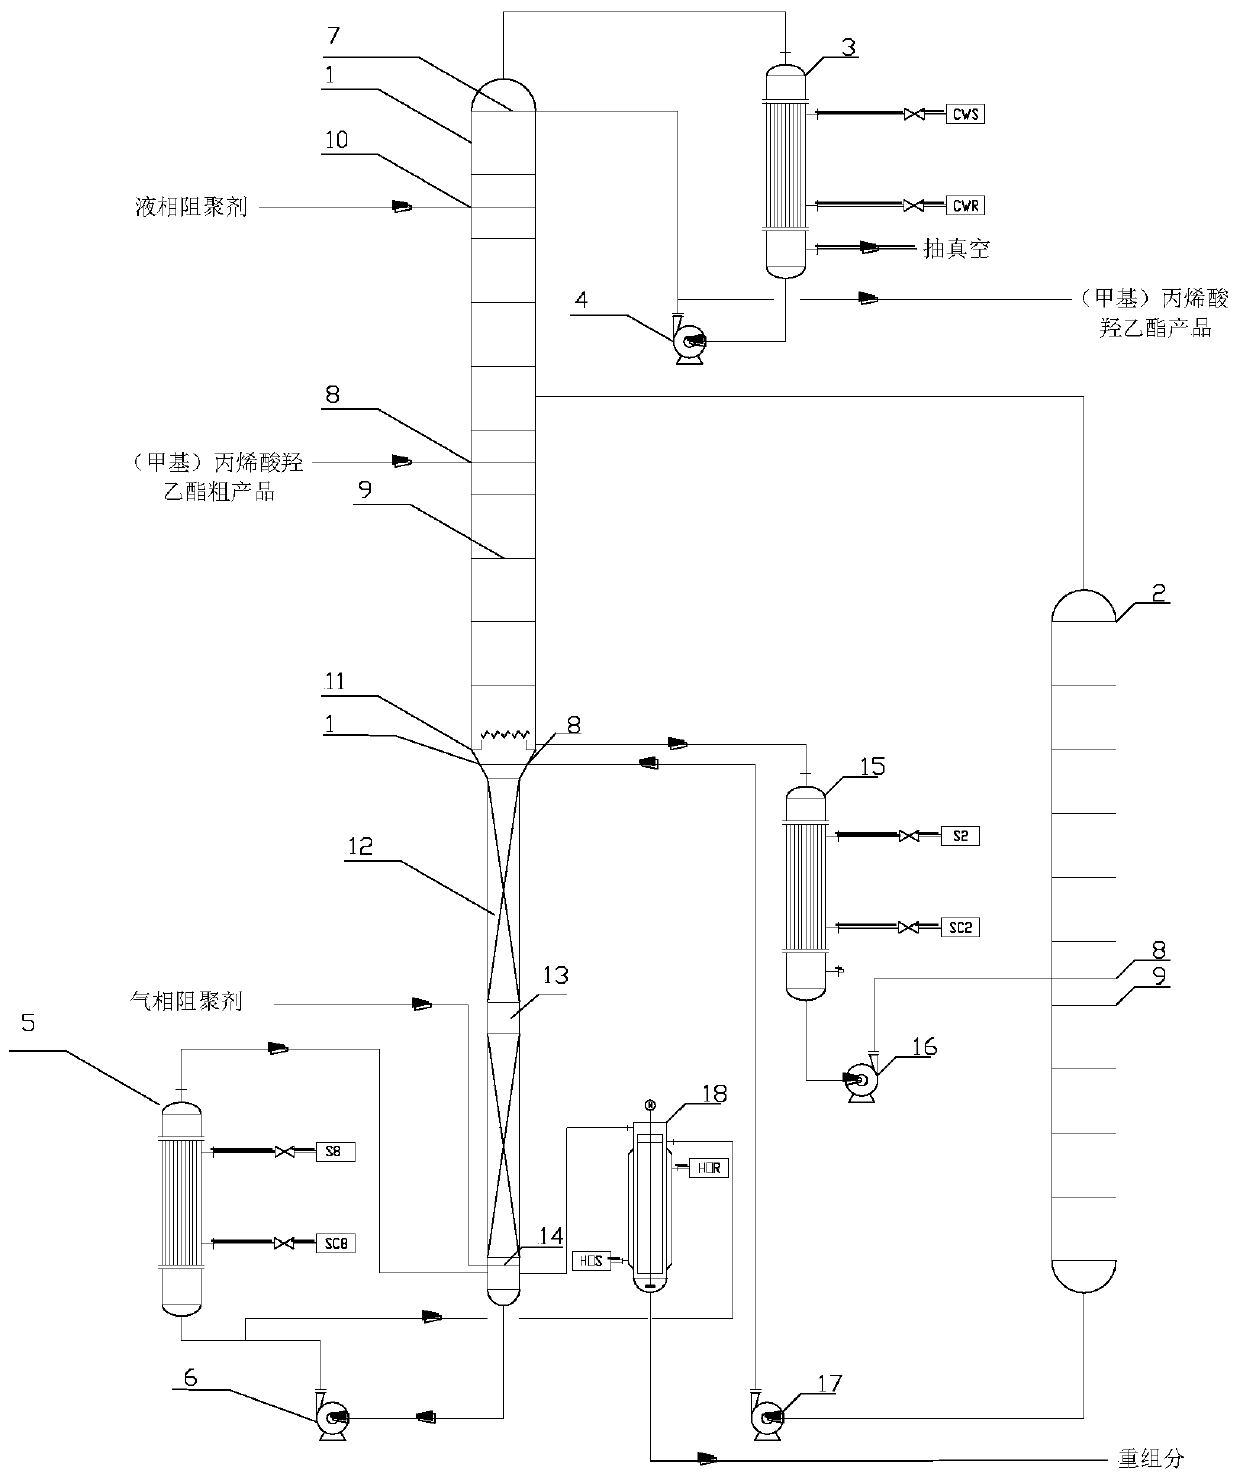 Continuous rectification separation method and device for (methyl) hydroxyethyl acrylate crude product